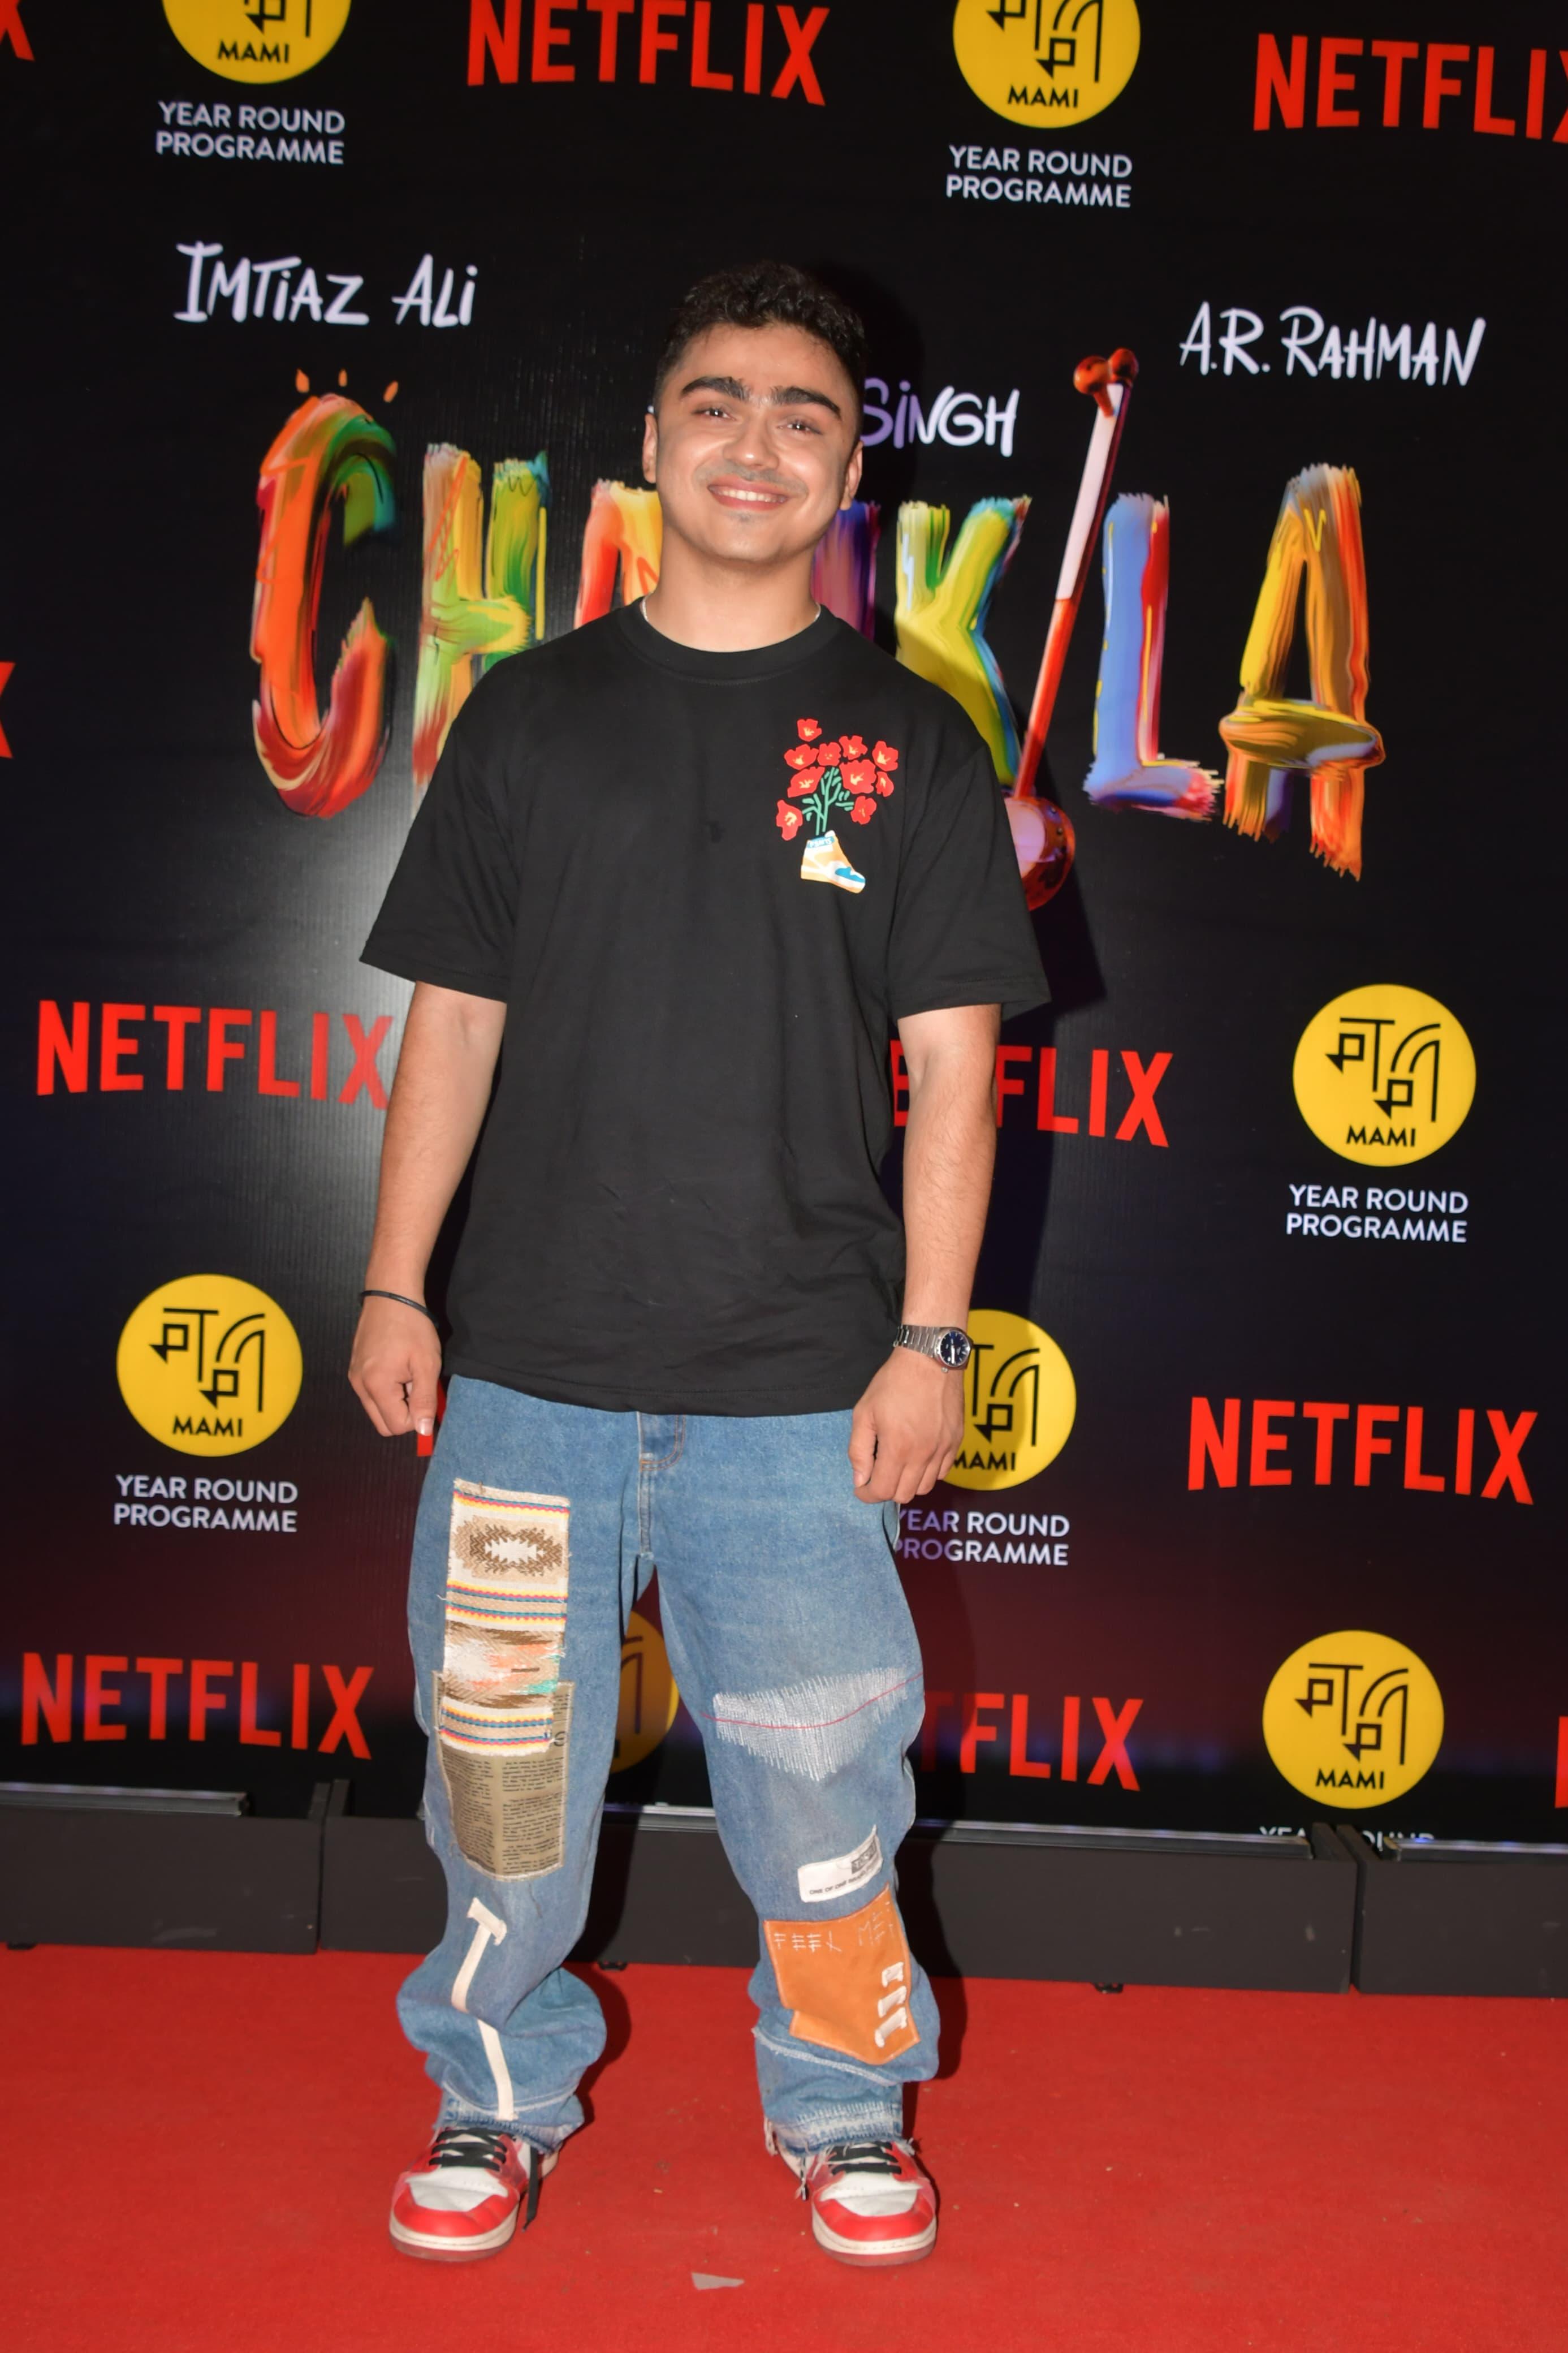 Rohan Shah was also present at the preview event